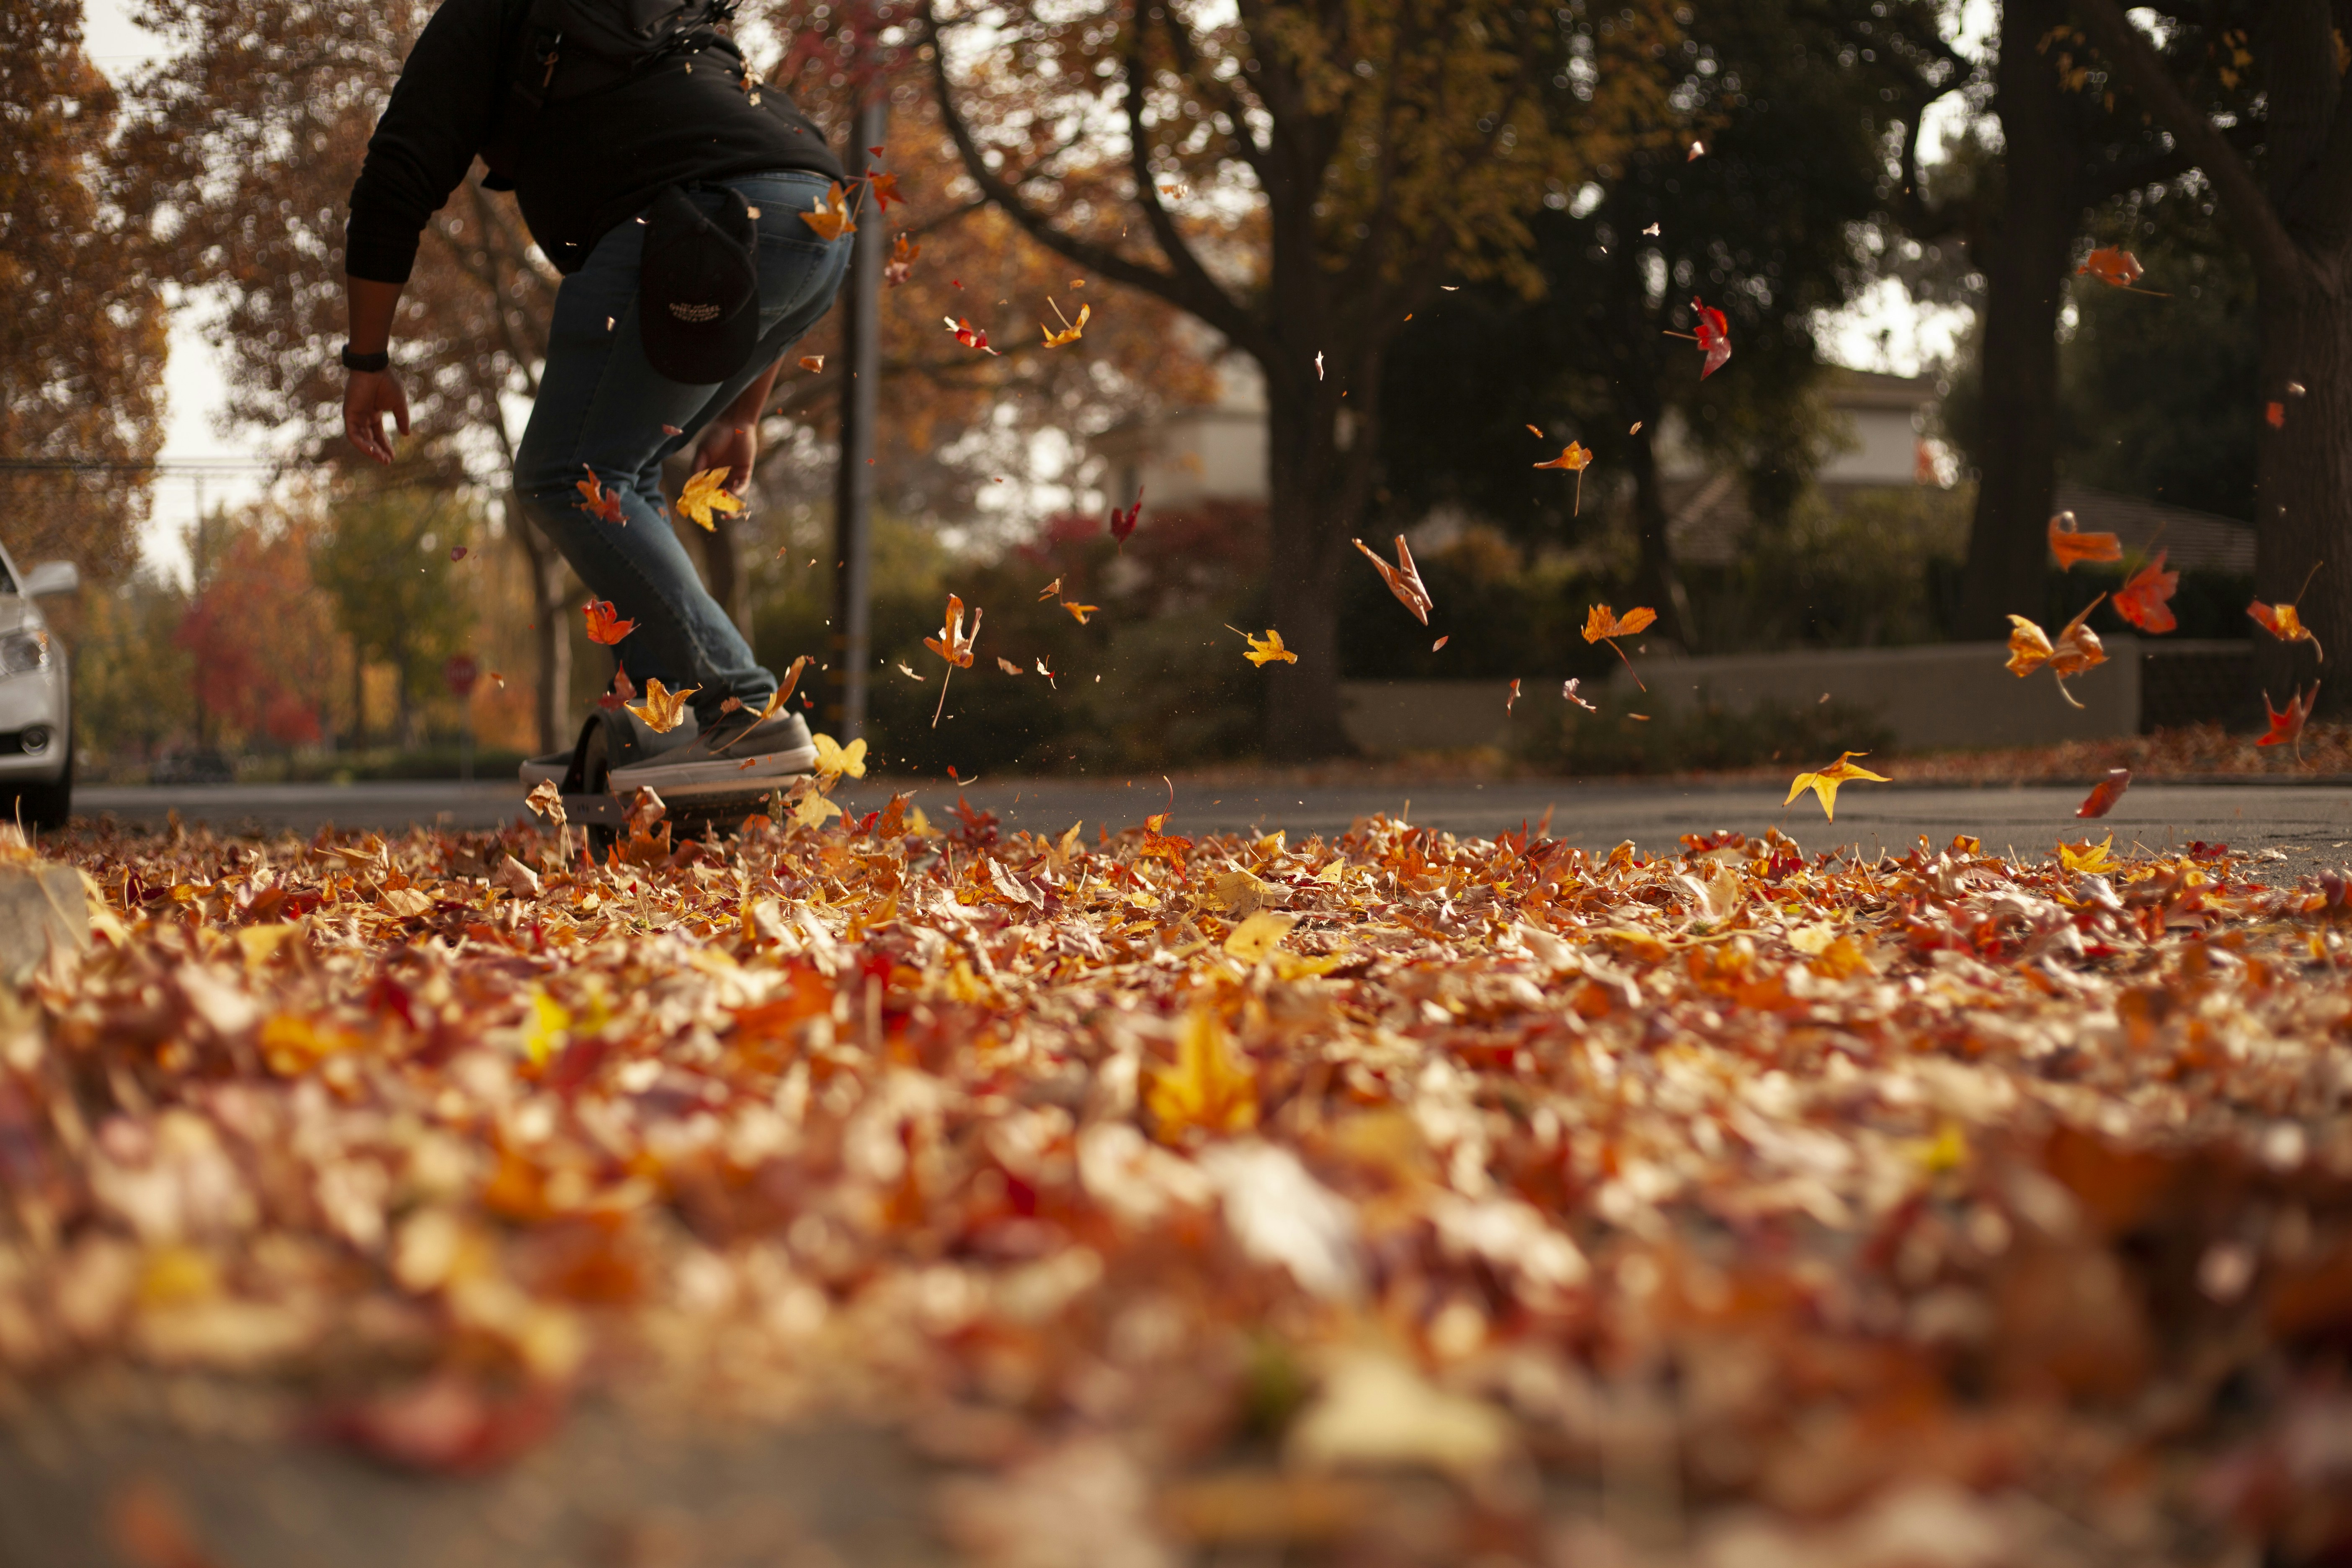 A Onewheel rider floating through a scenic pile of autumn leaves.